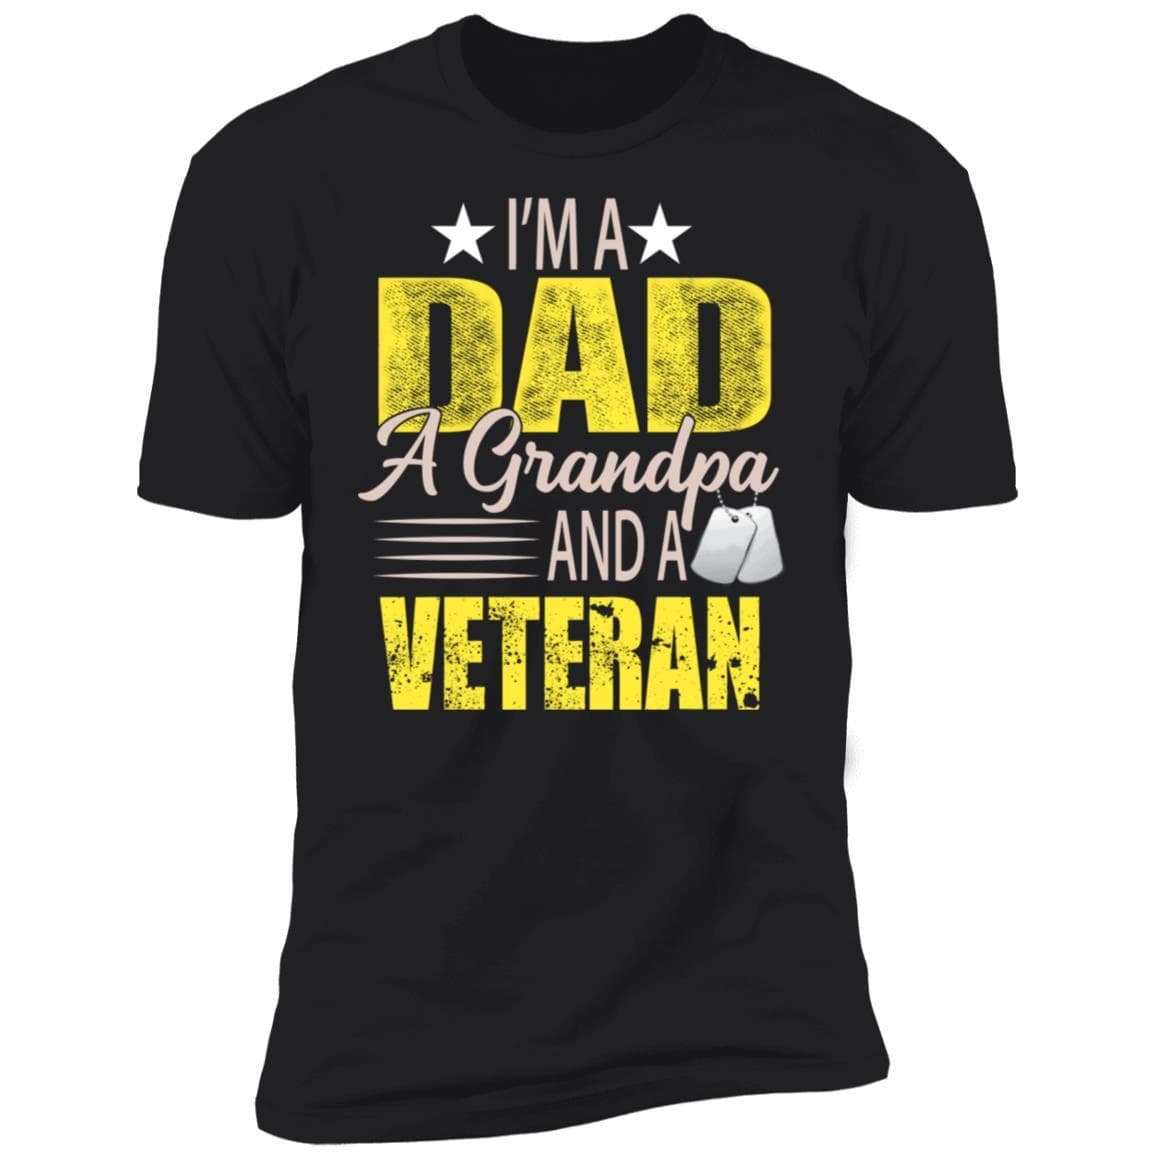 Military T-Shirt "I'm a Dad, a Grandpa and a Veteran - Next Level Premium On" Front-TShirt-General-Veterans Nation